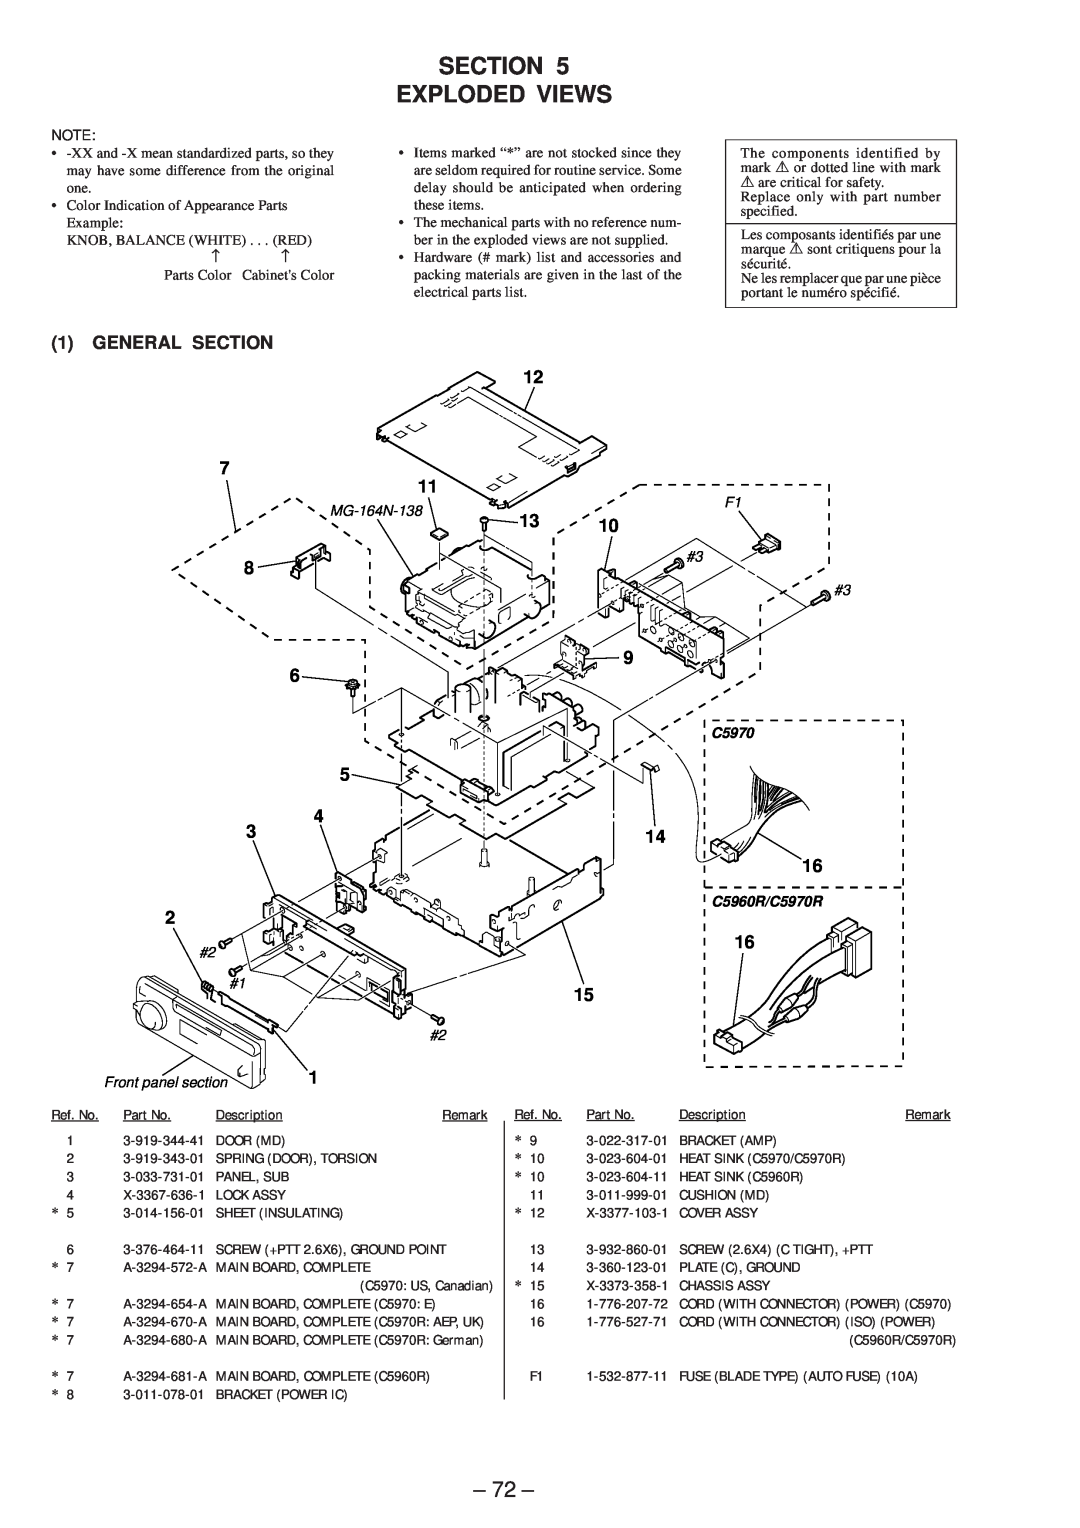 Sony MDX-C5970R service manual Section Exploded Views, 72, 1GENERAL 11, 5 4 3 2, 14 16, 16 15, C5960R/C5970R 